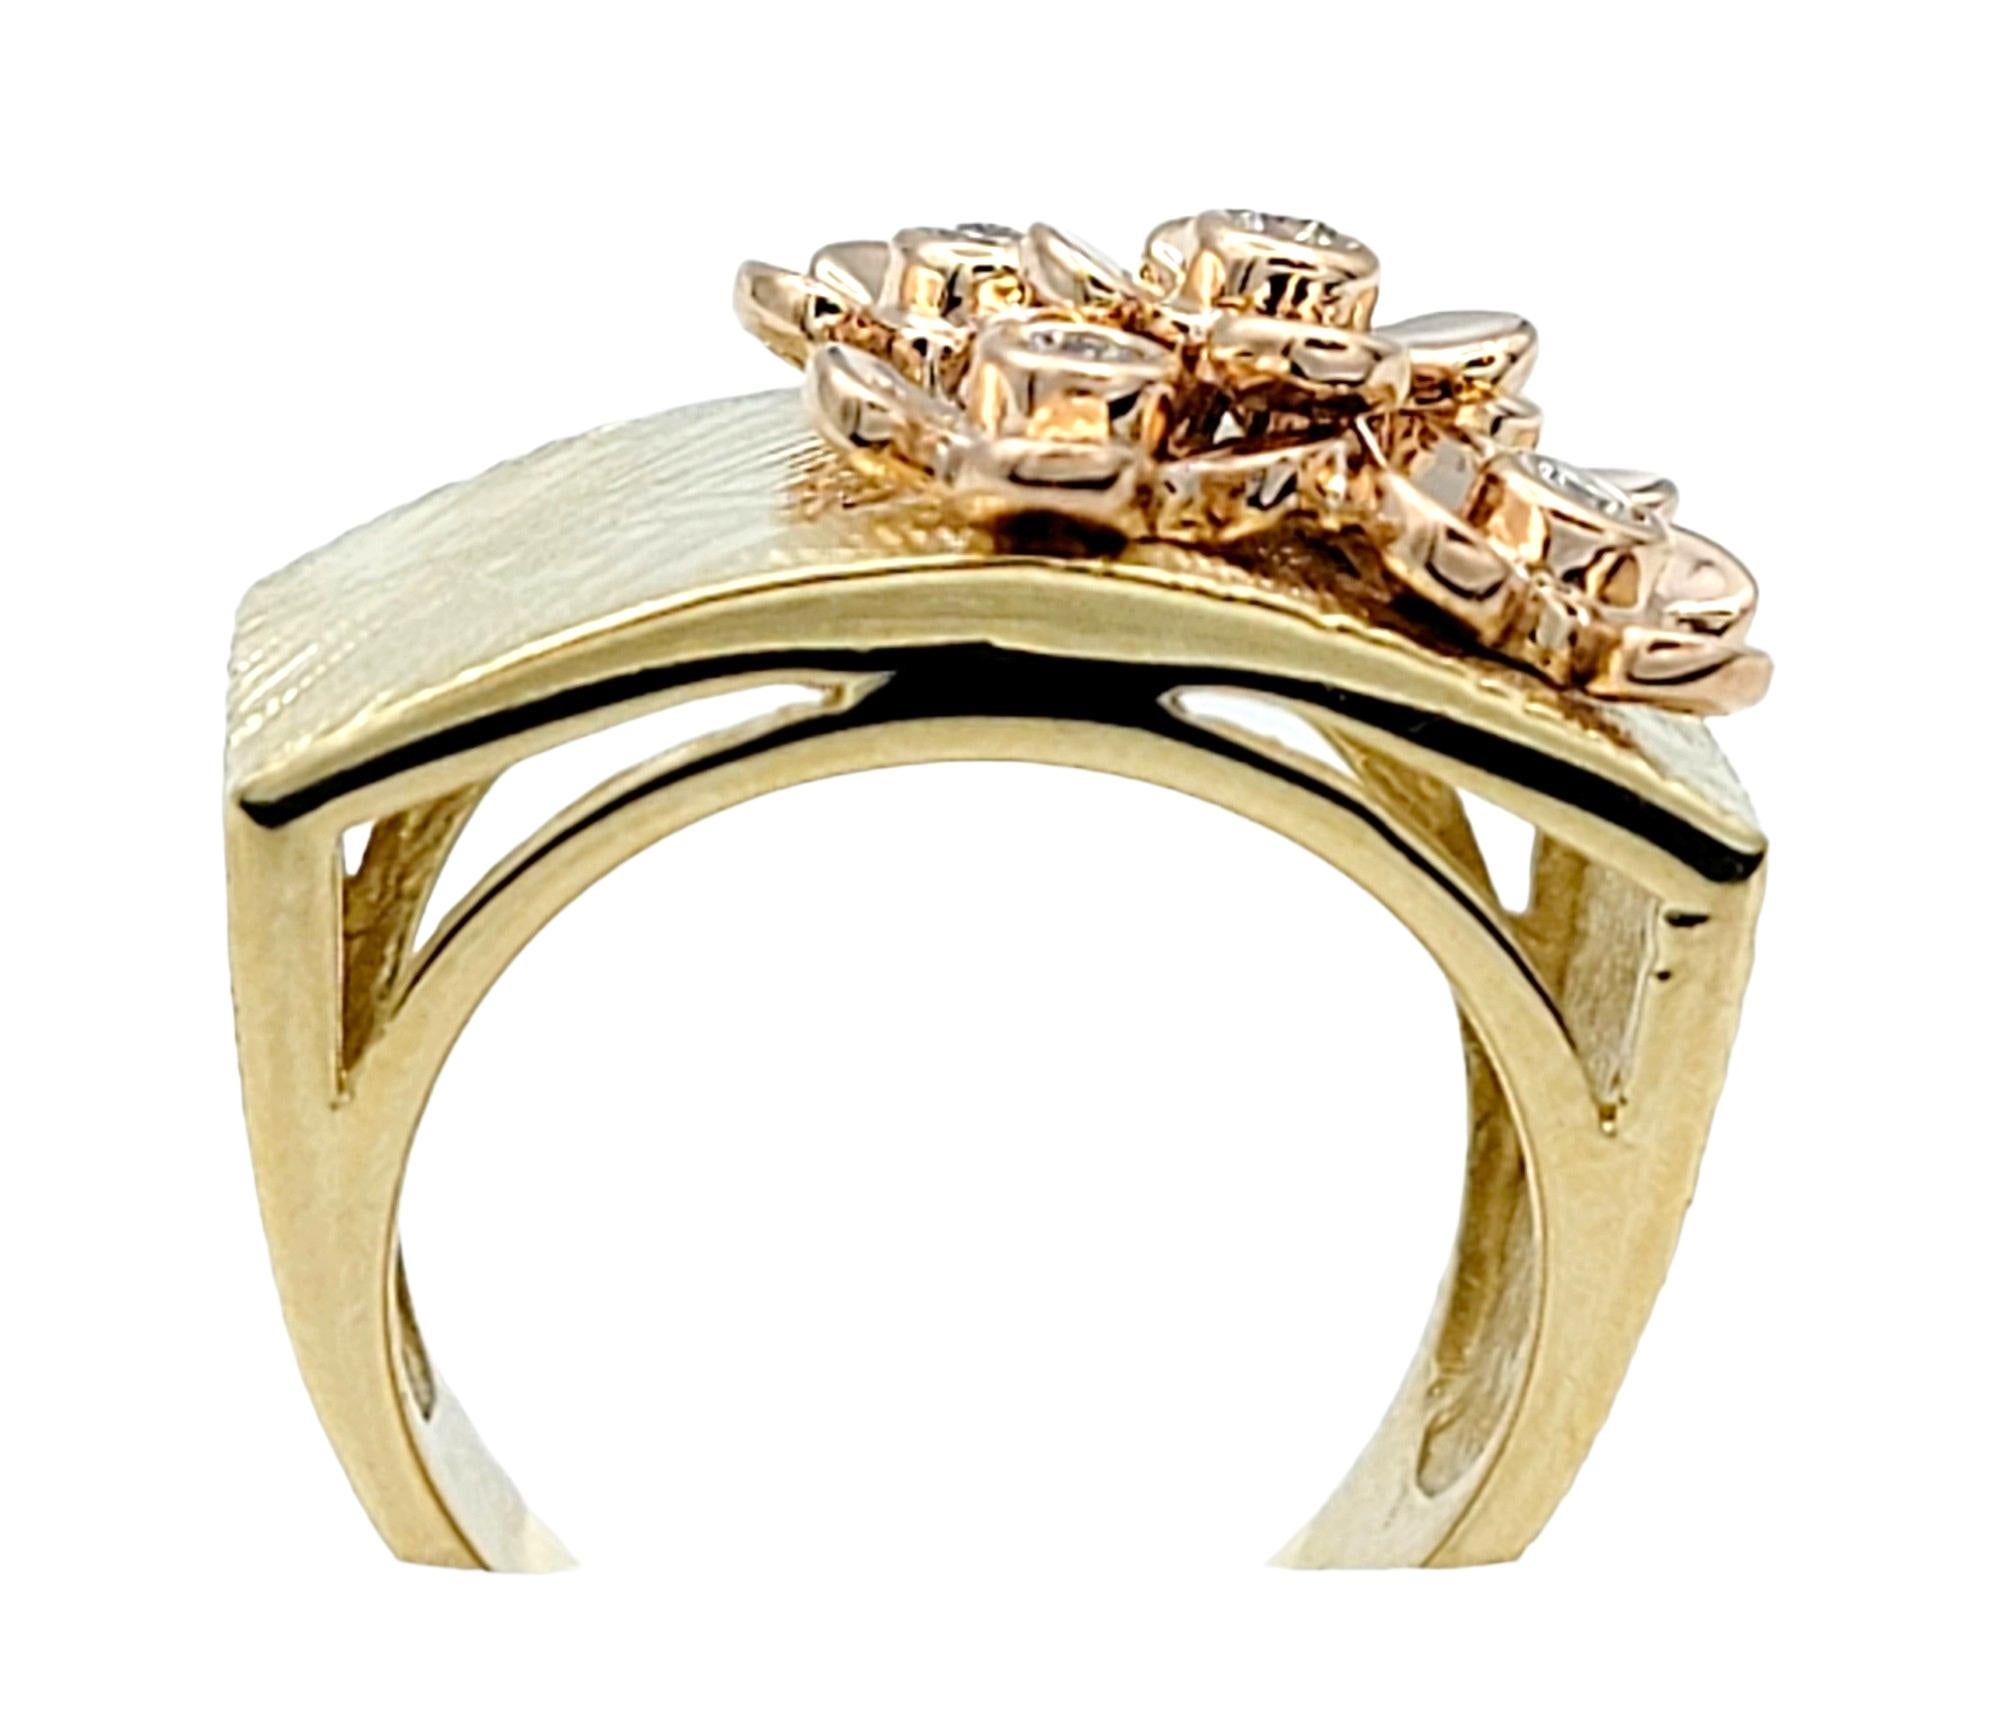 Contemporary Sonia B. Designs Two-Tone Gold Cocktail Ring with Diamond Accented Flower Motifs For Sale